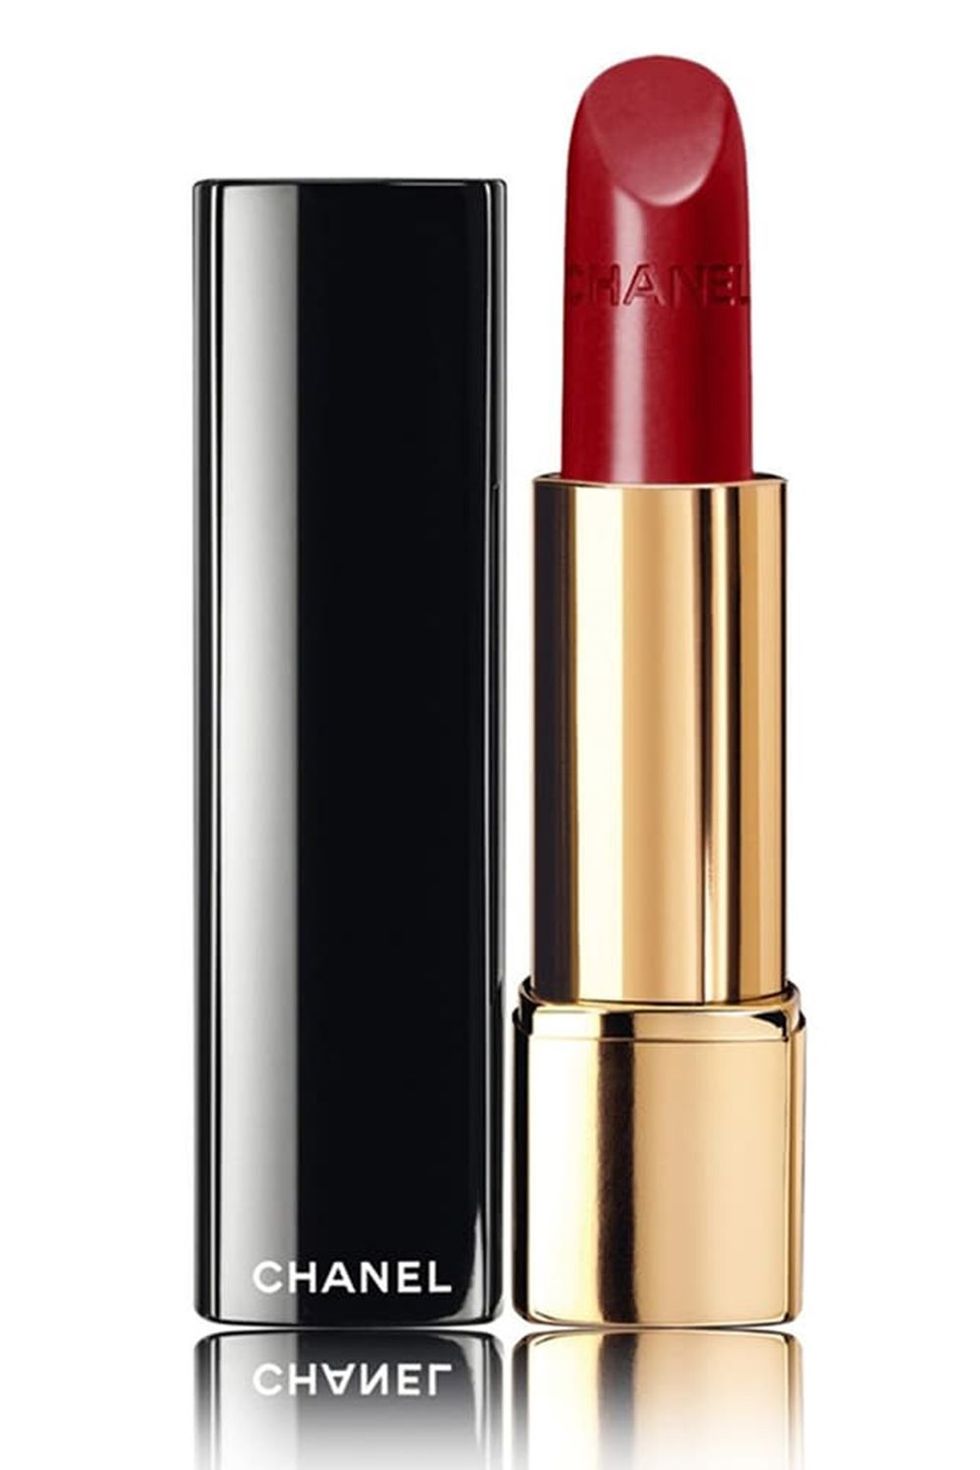 Chanel Rouge Allure in # 99 Pirate. The ultimate red lipstick.